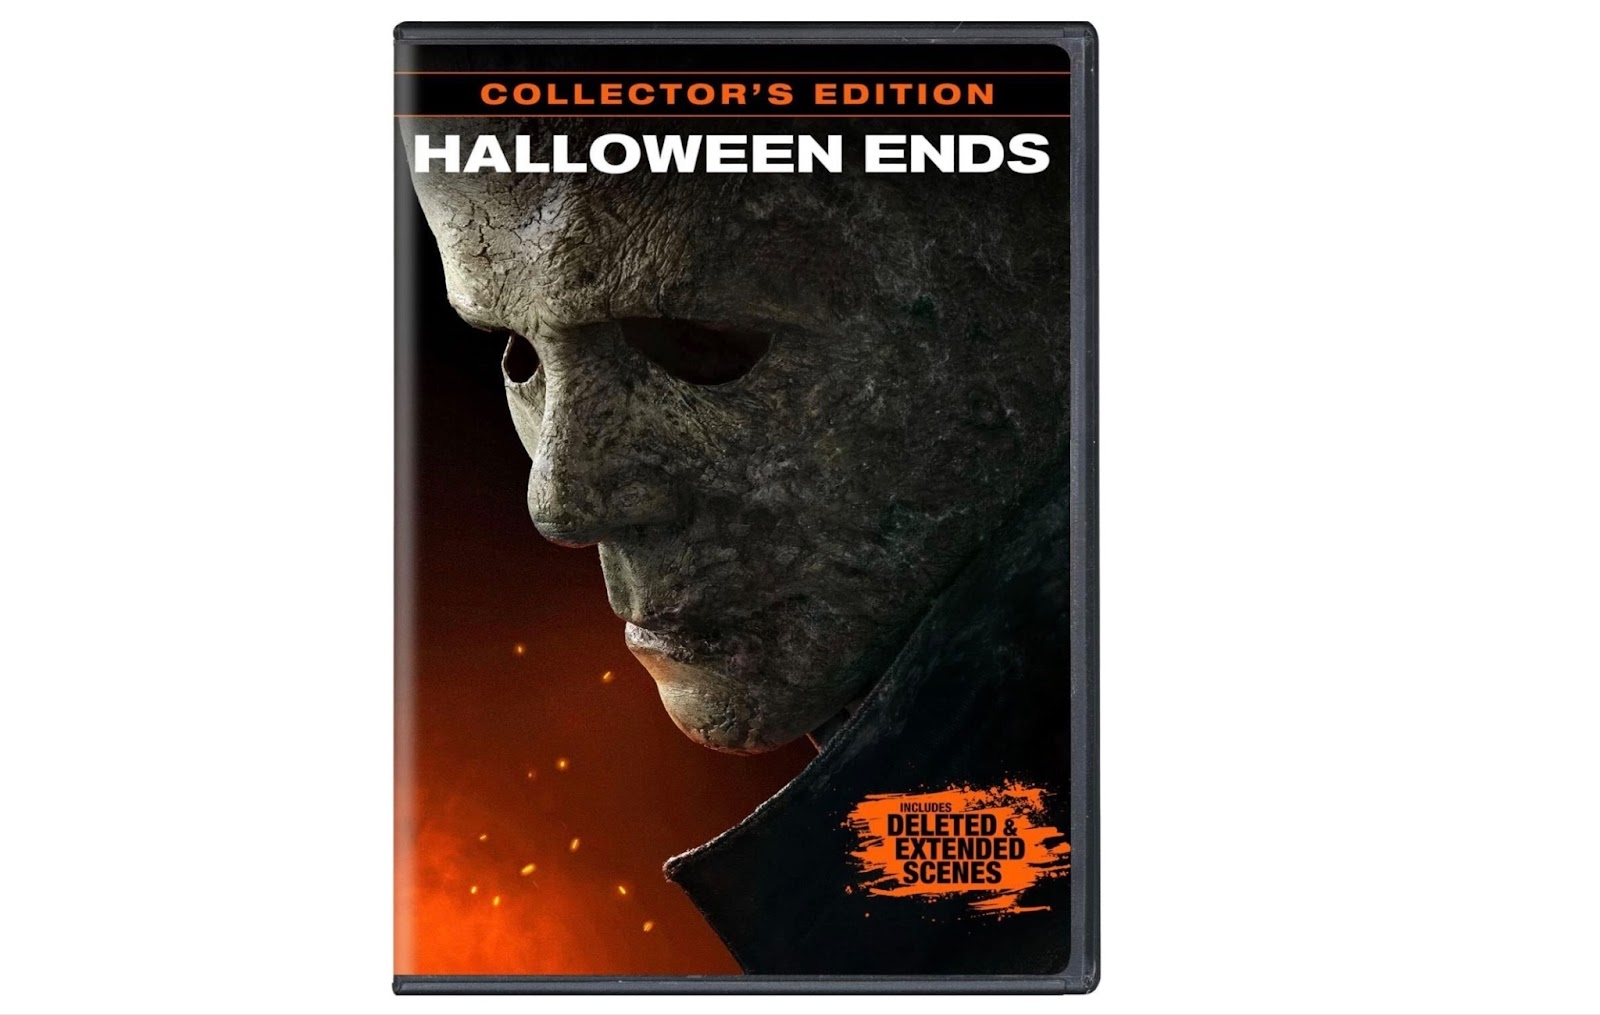 Halloween Ends DVD Release Date: What Fans Can Expect